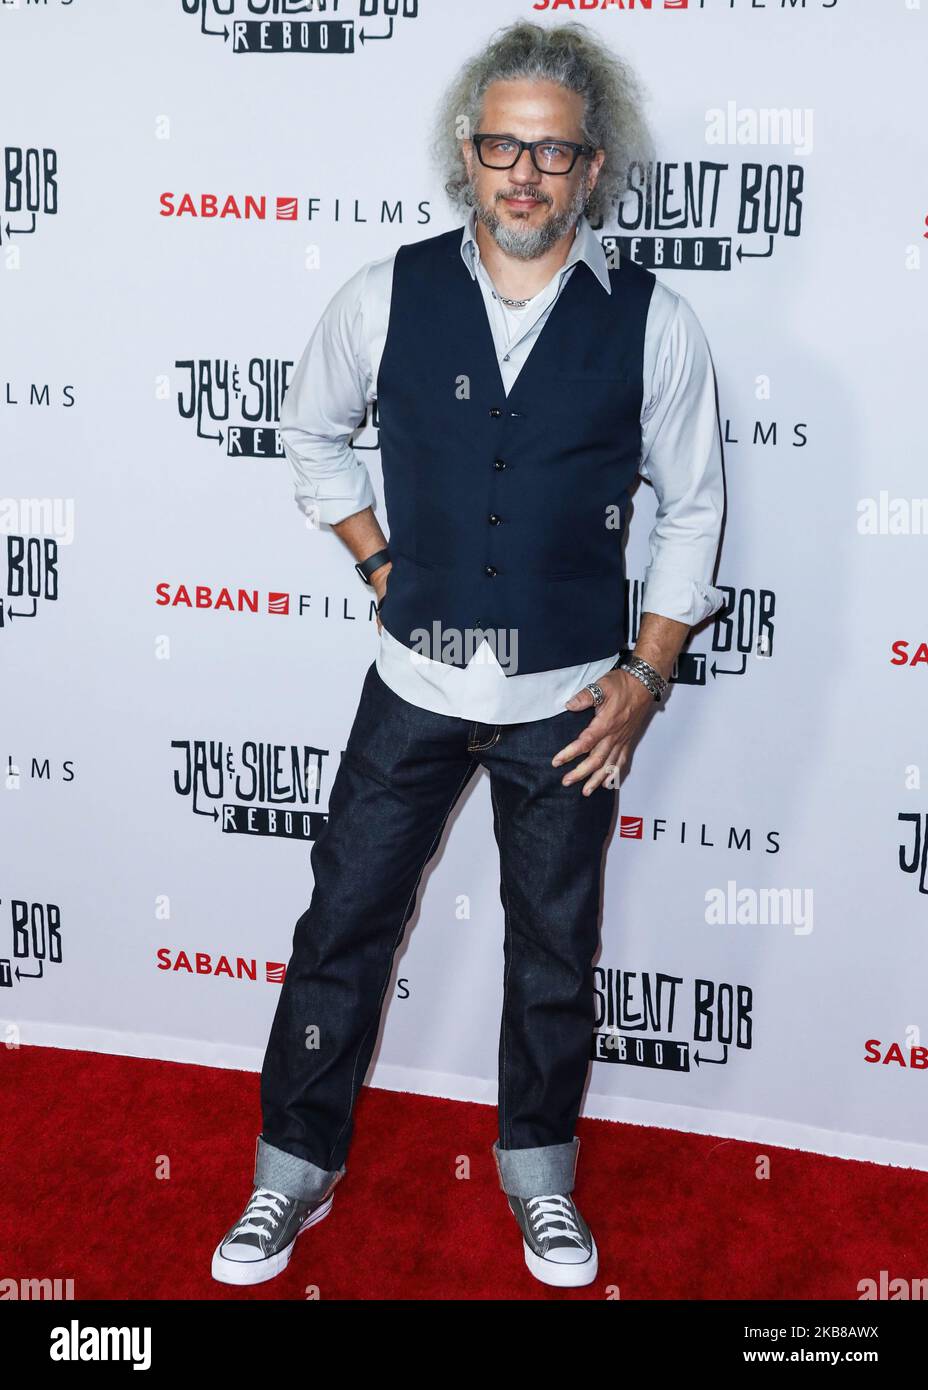 HOLLYWOOD, LOS ANGELES, CALIFORNIA, USA - OCTOBER 14: Actor Joseph D. Reitman arrives at the Los Angeles Premiere Of Saban Films' 'Jay and Silent Bob Reboot' held at the TCL Chinese Theatre IMAX on October 14, 2019 in Hollywood, Los Angeles, California, United States. (Photo by David Acosta/Image Press Agency/NurPhoto) Stock Photo